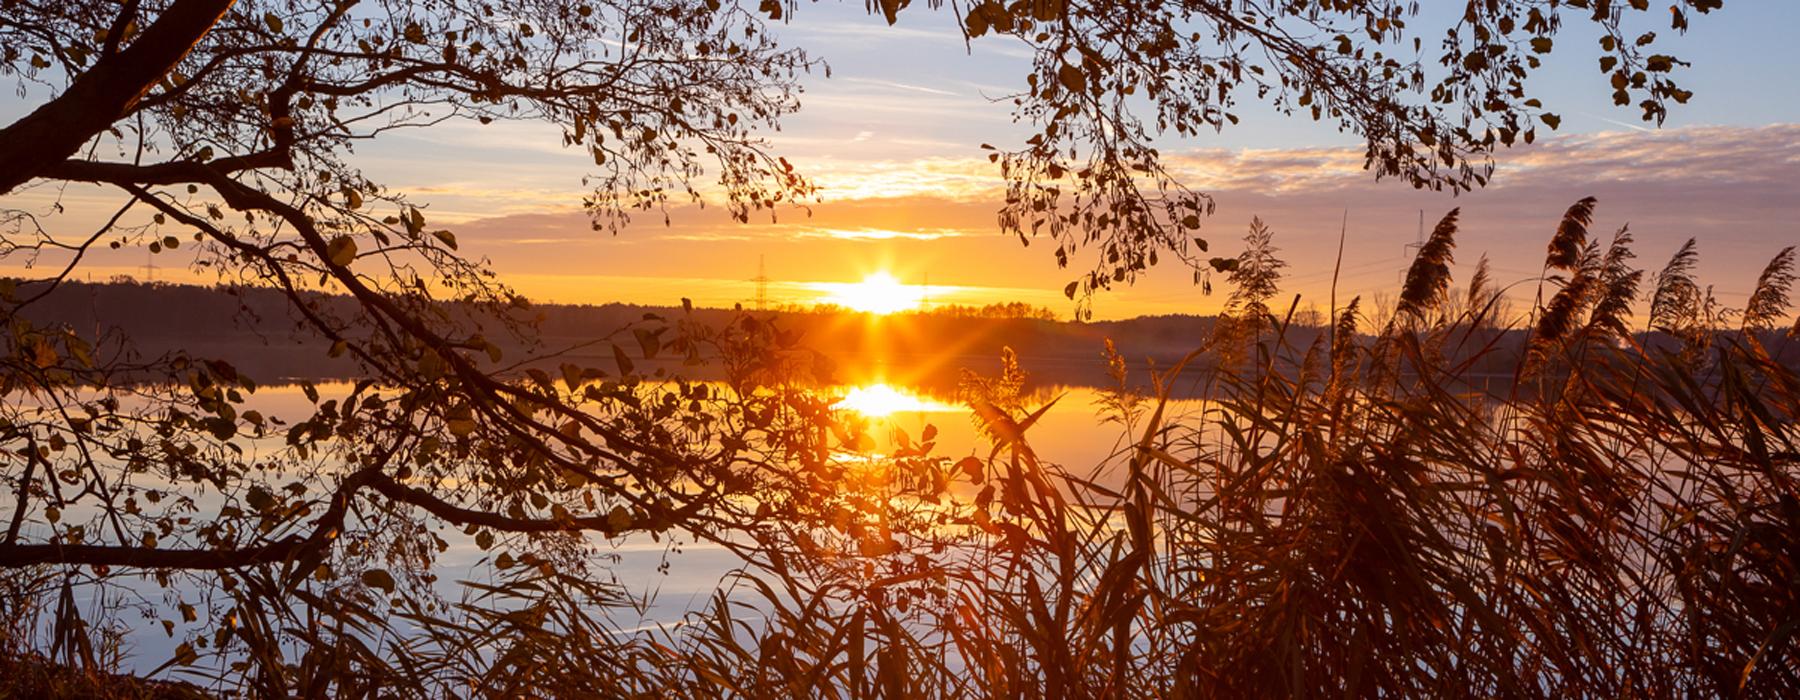 View of a sunset at the lake in Thalberg